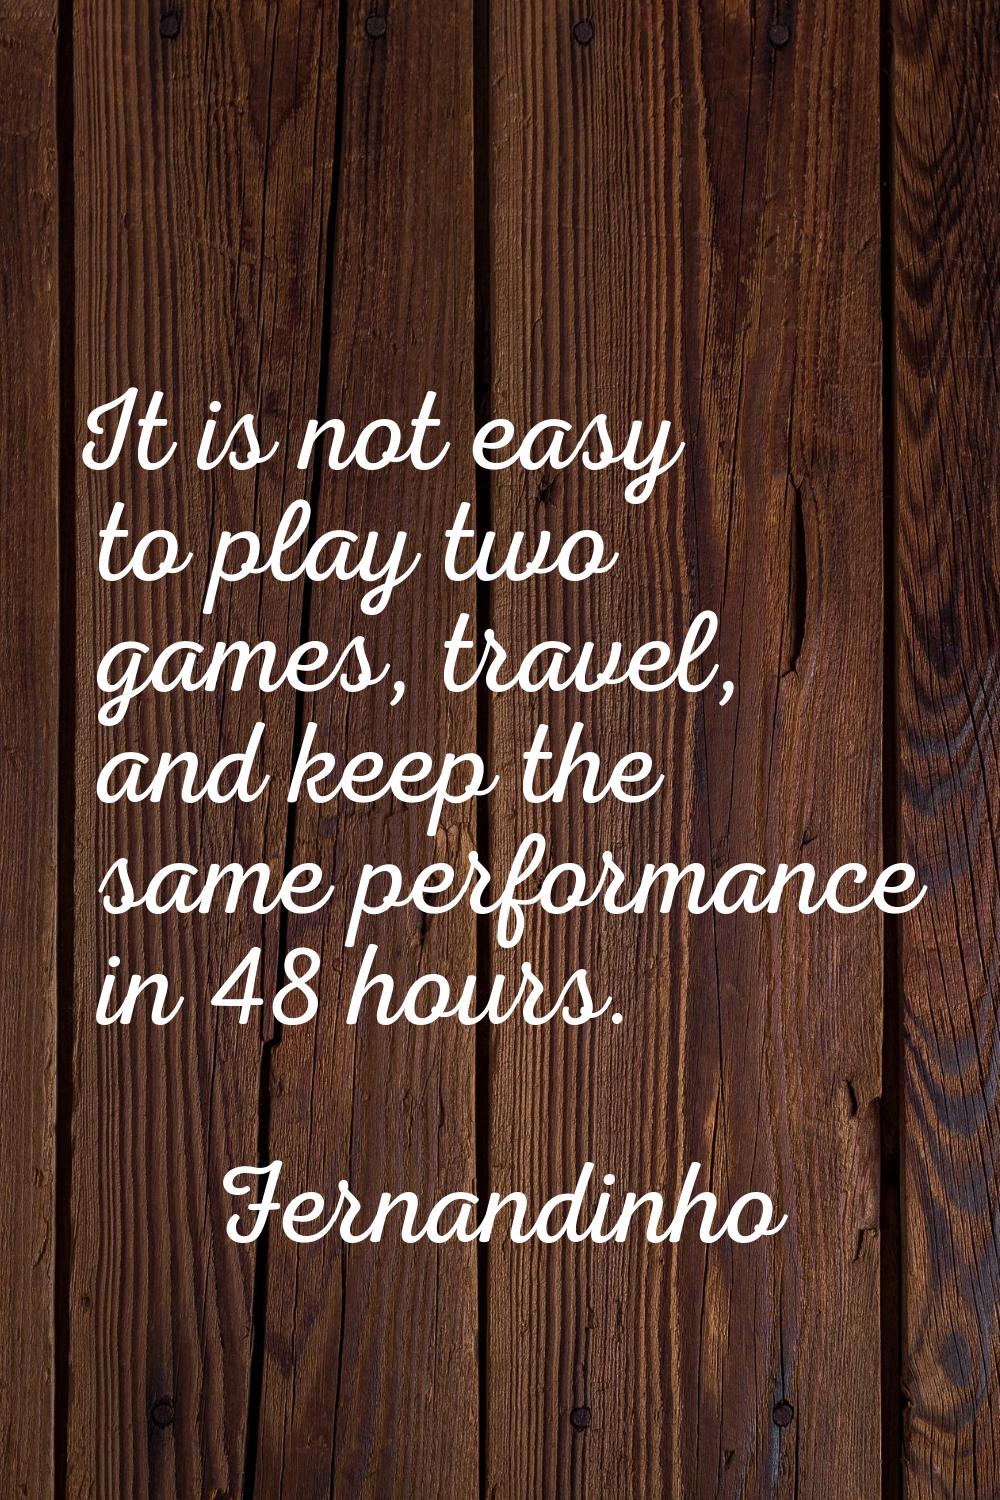 It is not easy to play two games, travel, and keep the same performance in 48 hours.